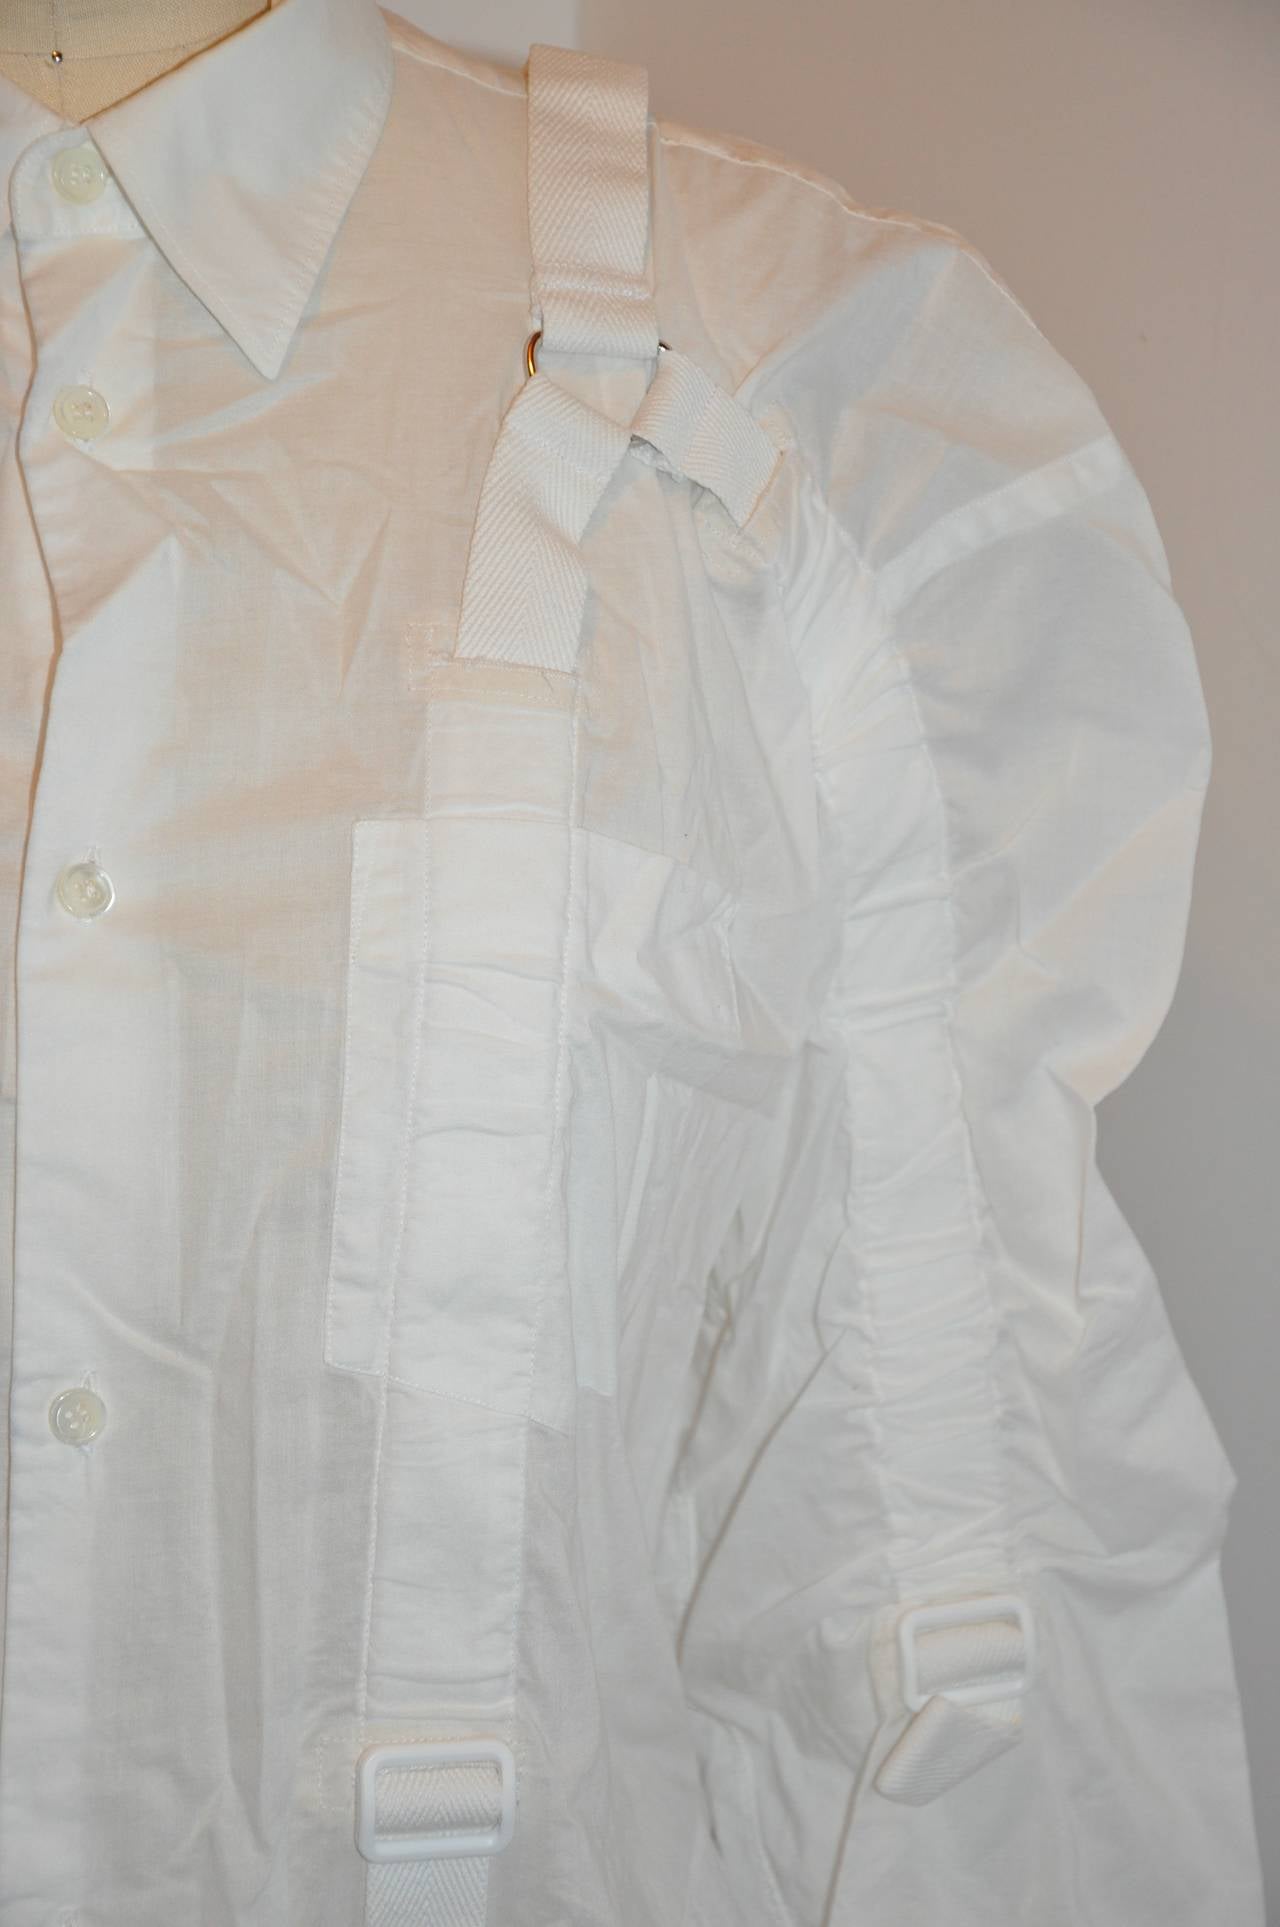 This wonderfully wicked Junya Watanabe Comme des Garcons white deconstructed button shirt is wildly detailed with adjustable woven cotton drawstrings throughout the front, back and also on the sleeves. The front has six buttons along with an extra